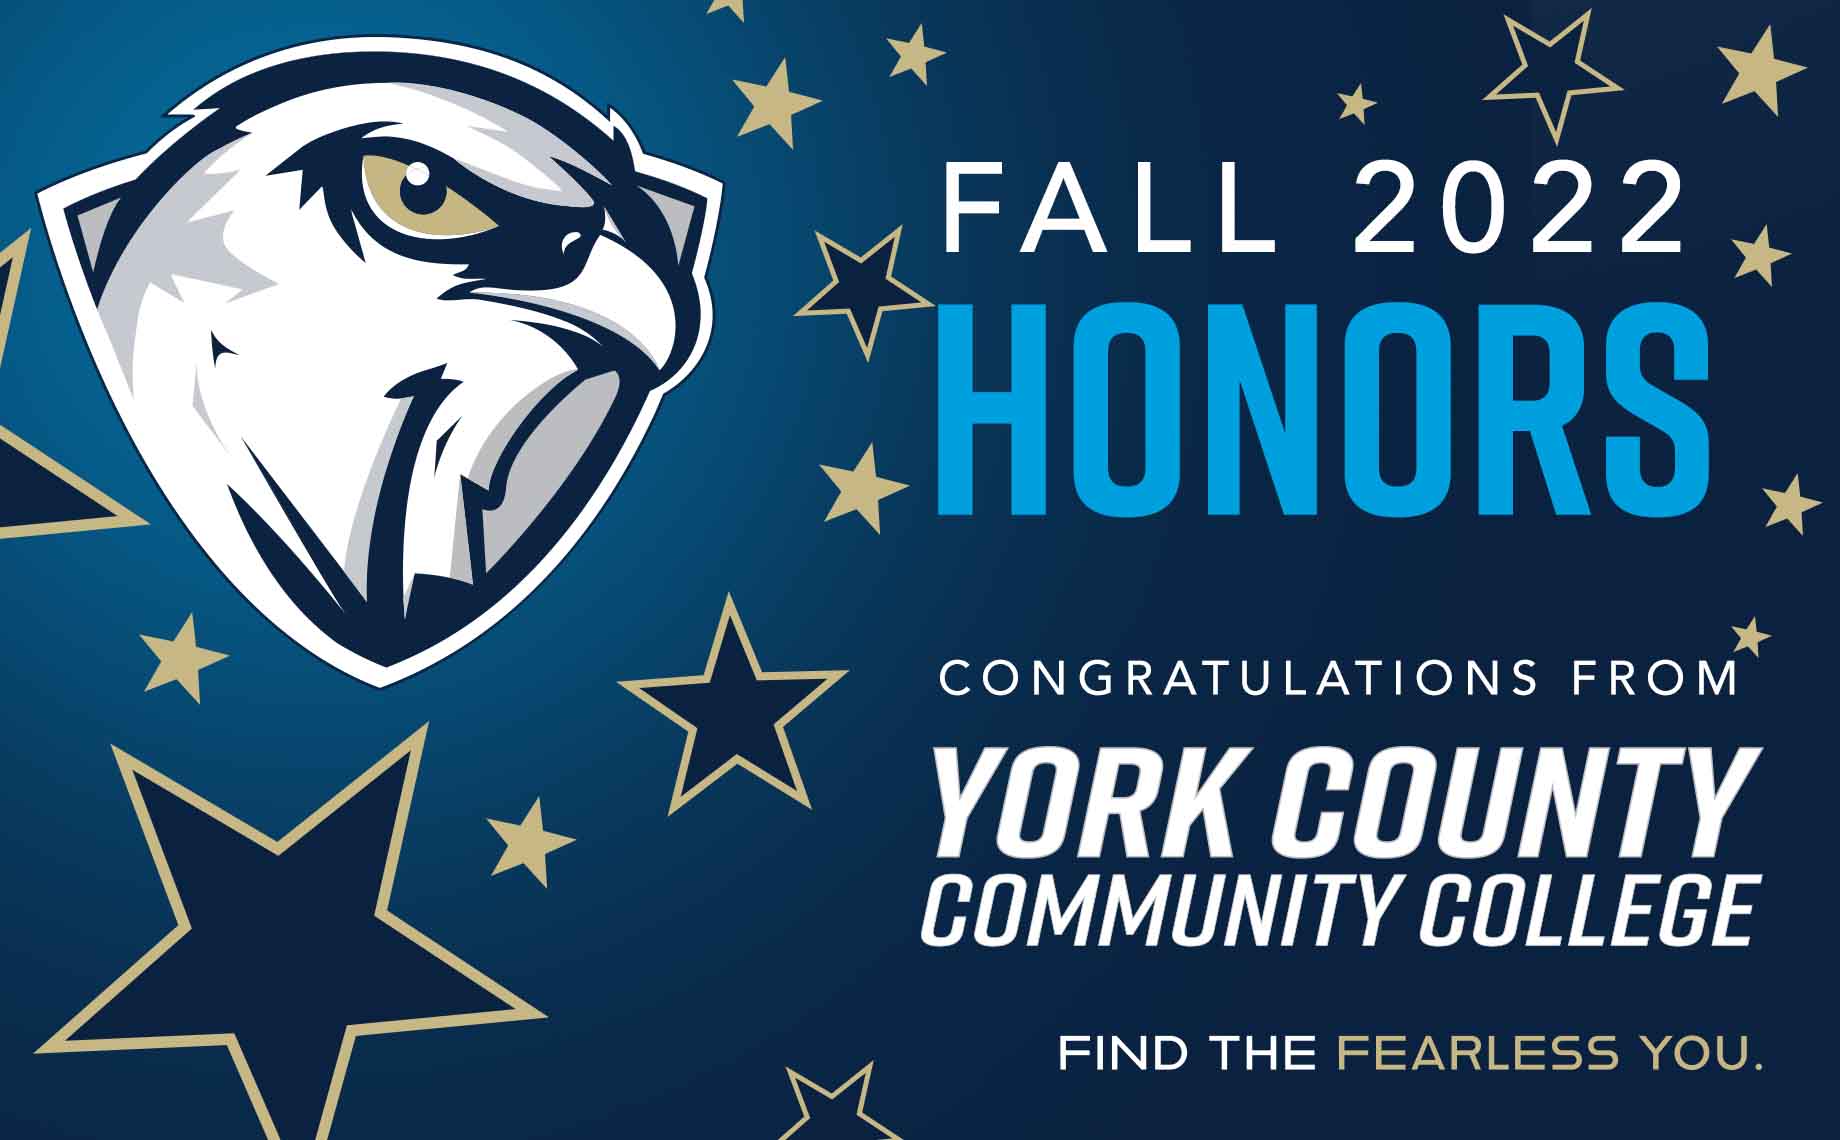 YCCC Announces FALL 2022 Honors